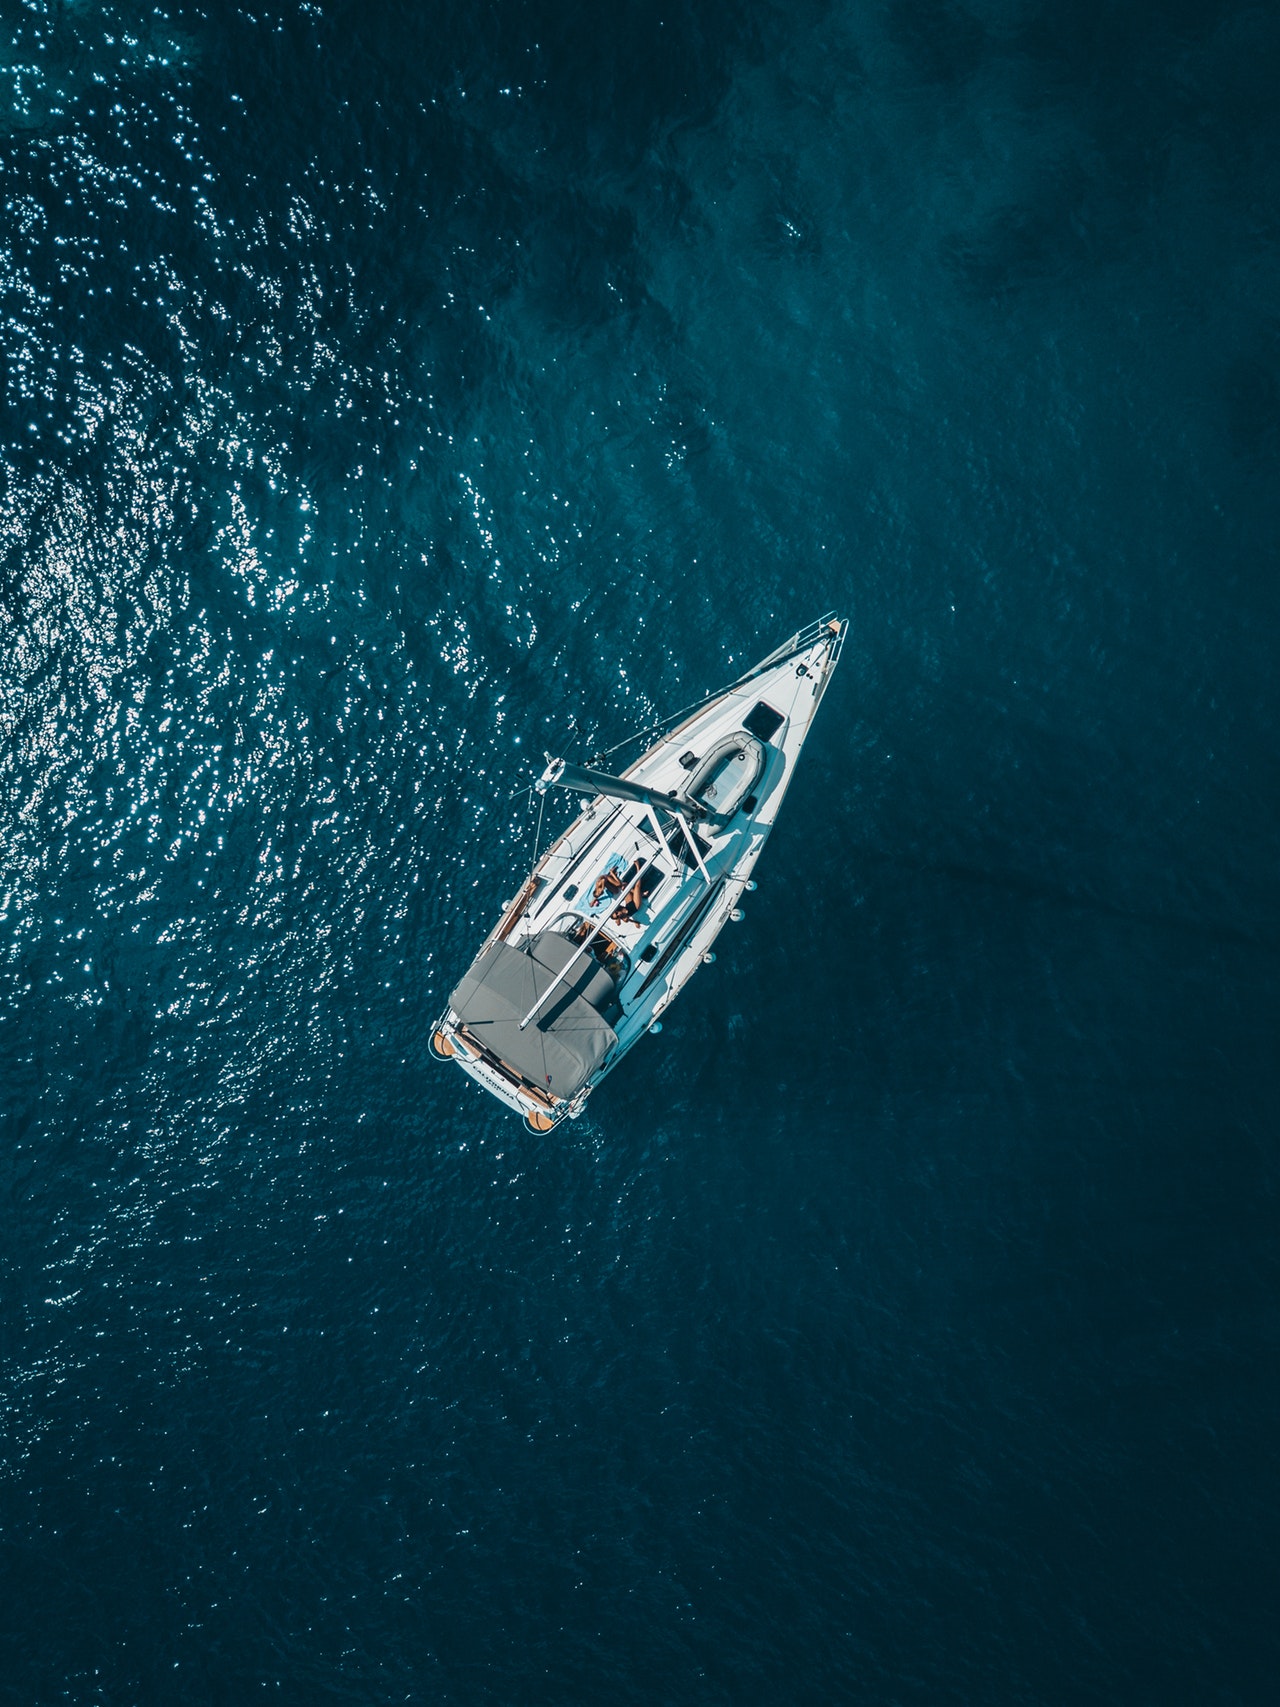 Whatever Floats Your Boat: Safe Boating Tips